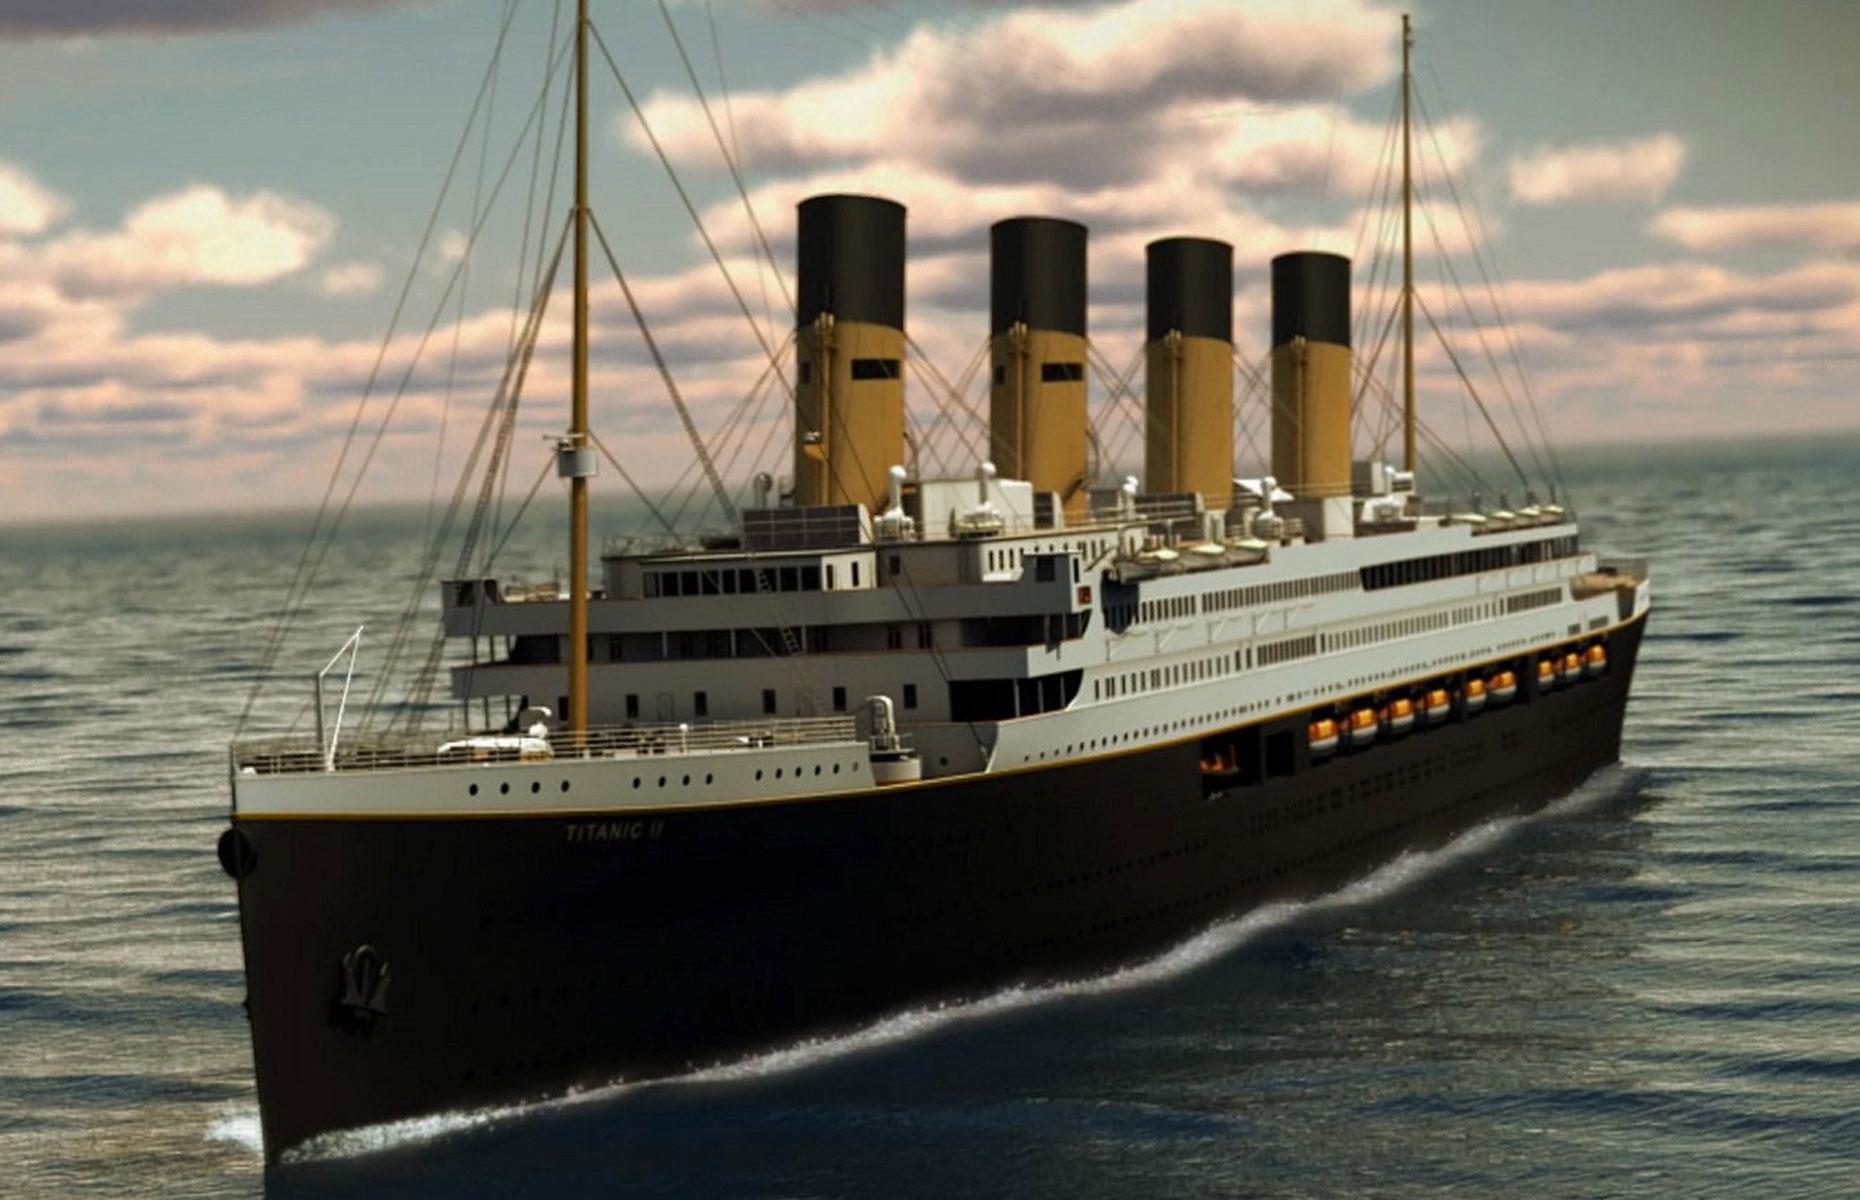 The man to launch...another Titanic?